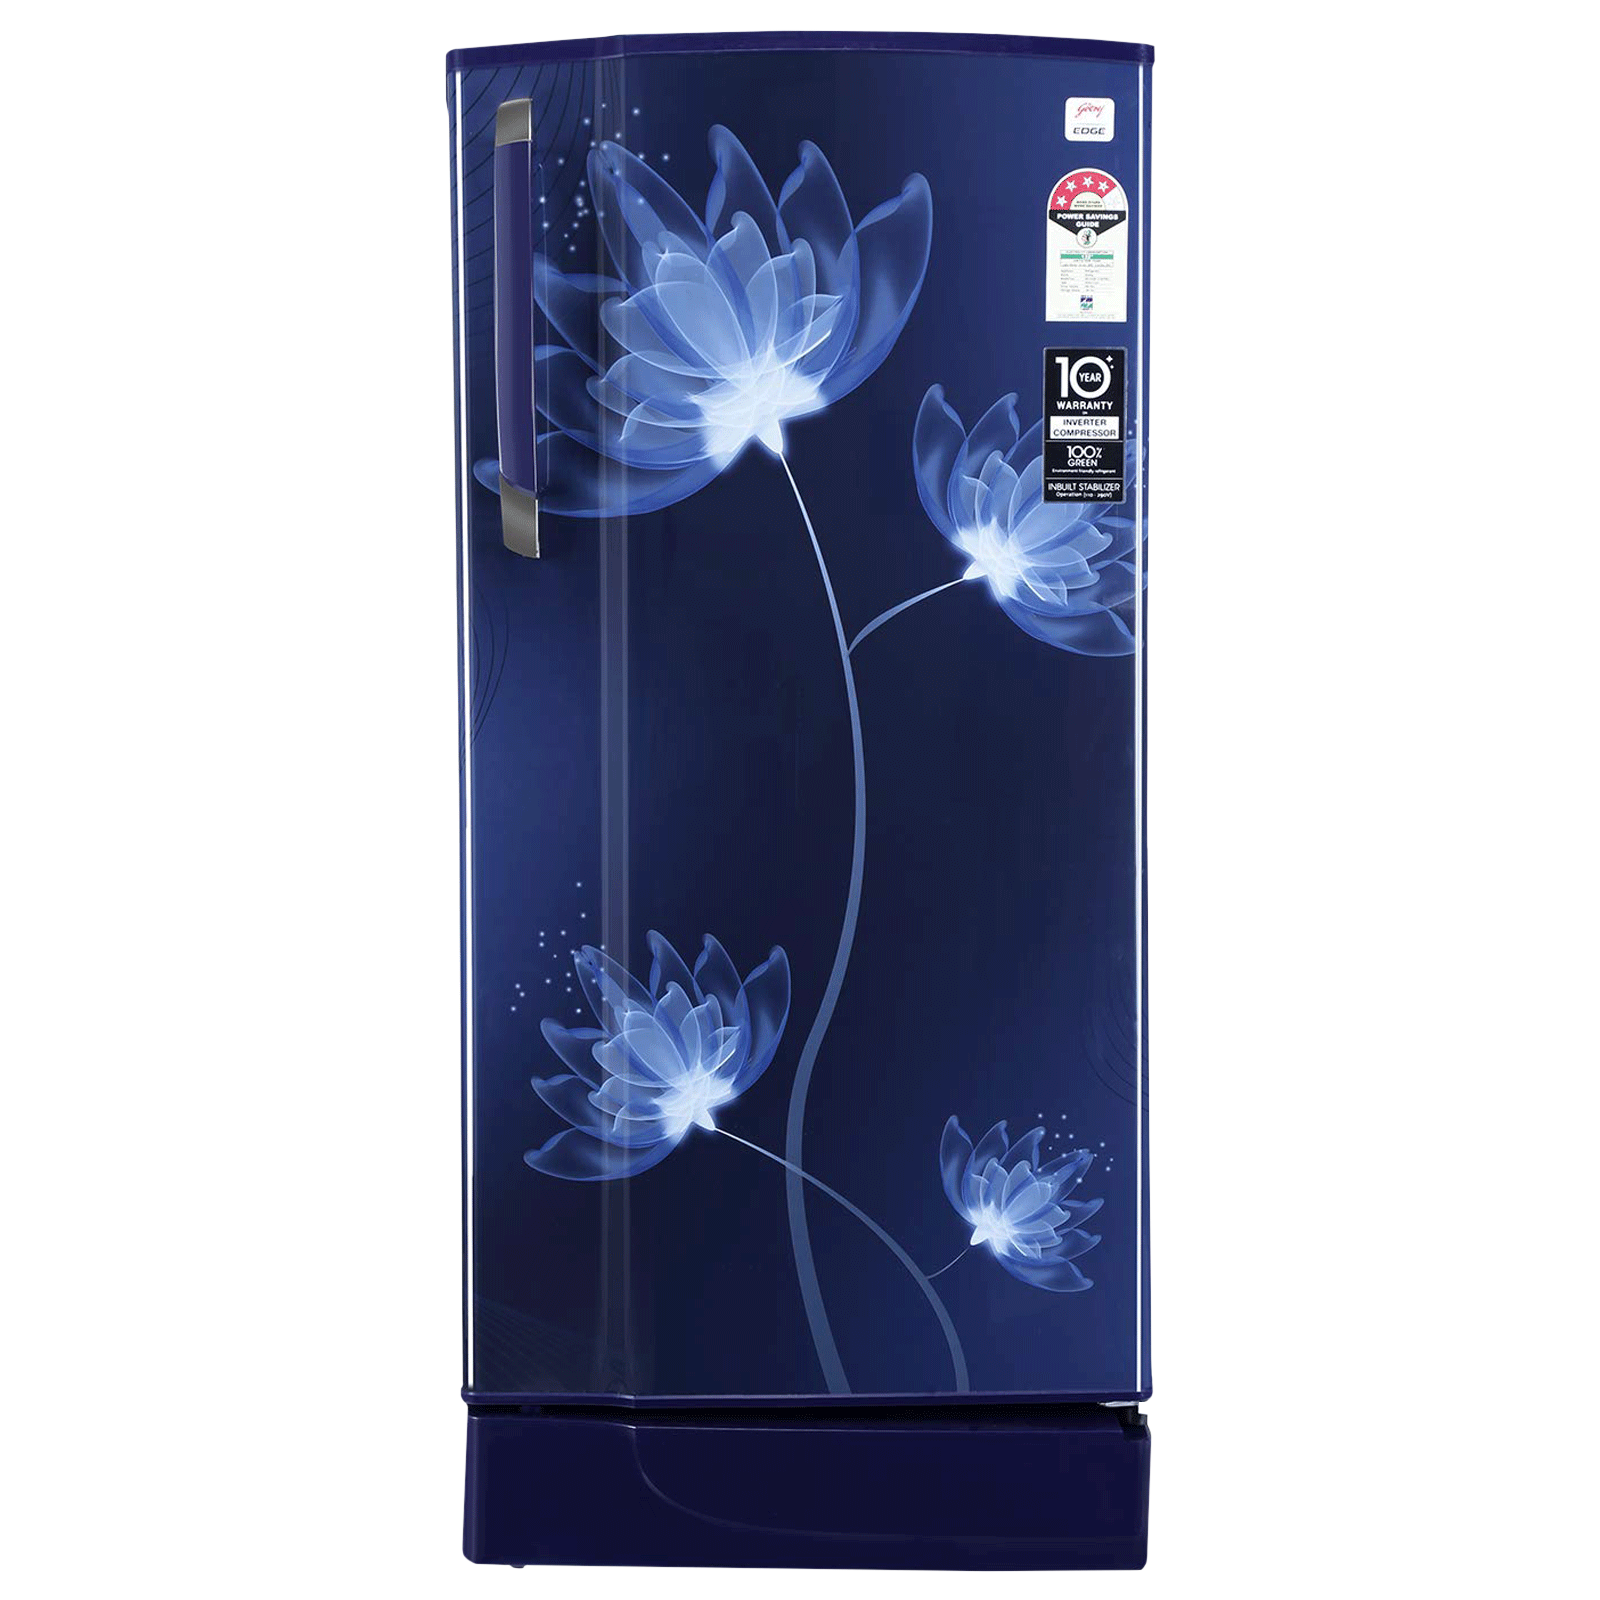 Godrej Edge 200 Litres 4 Star Direct Cool Single Door Refrigerator with Uniform Cooling Technology (RD EDGE 215D 43 TAI, Glass Blue)_1